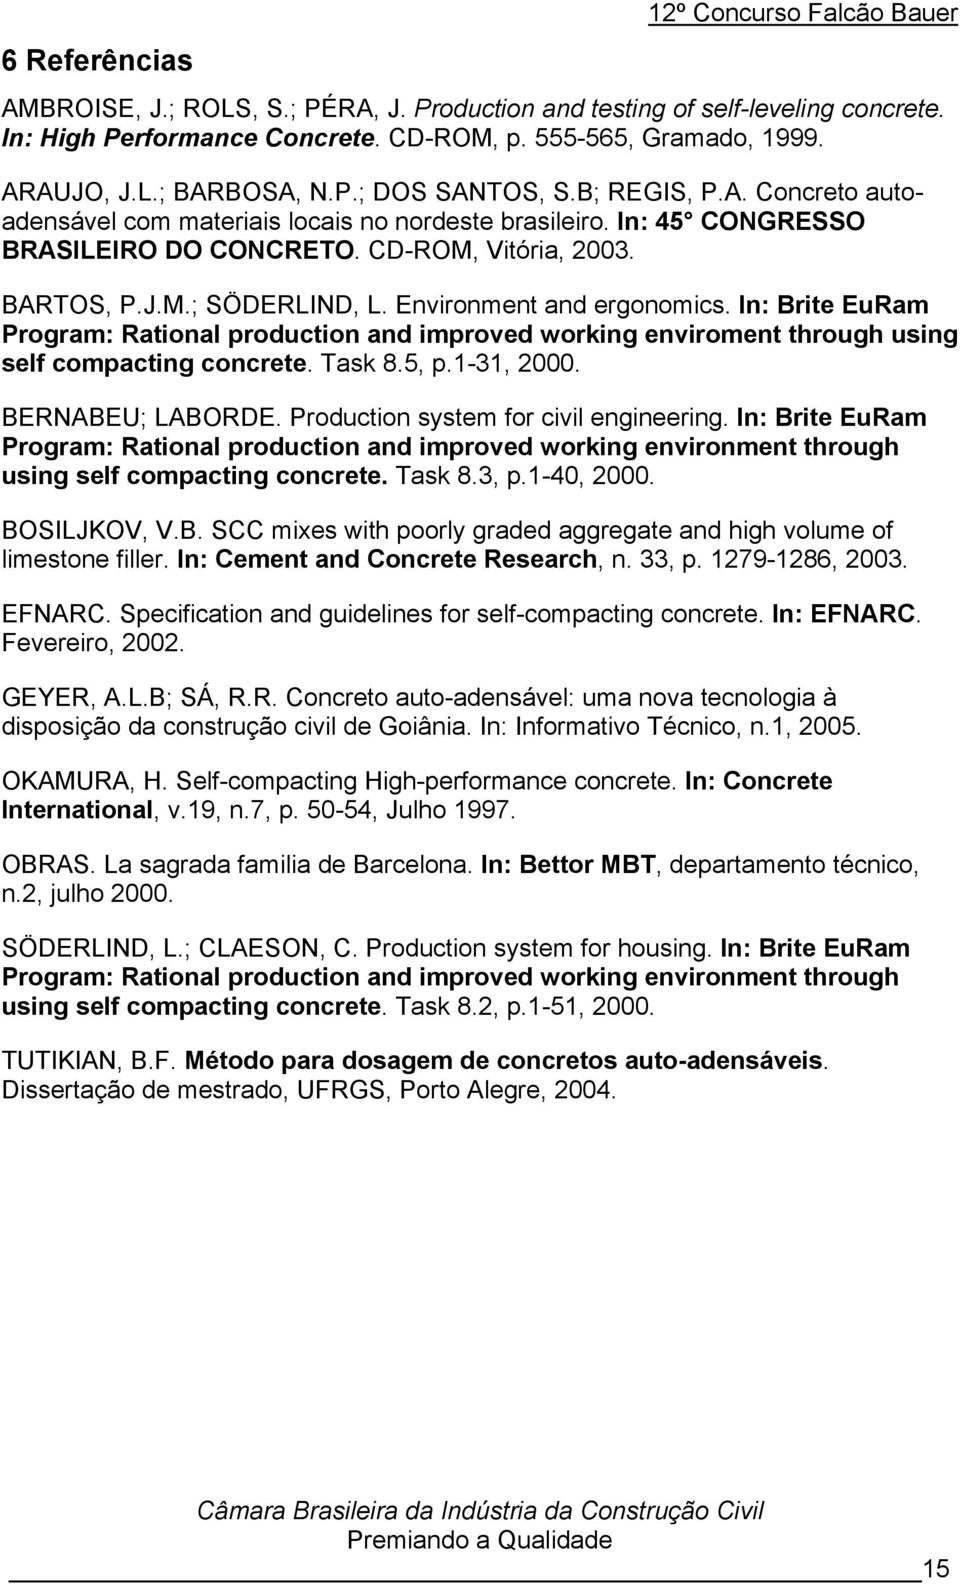 Environment and ergonomics. In: Brite EuRam Program: Rational production and improved working enviroment through using self compacting concrete. Task 8.5, p.1-31, 2000. BERNABEU; LABORDE.